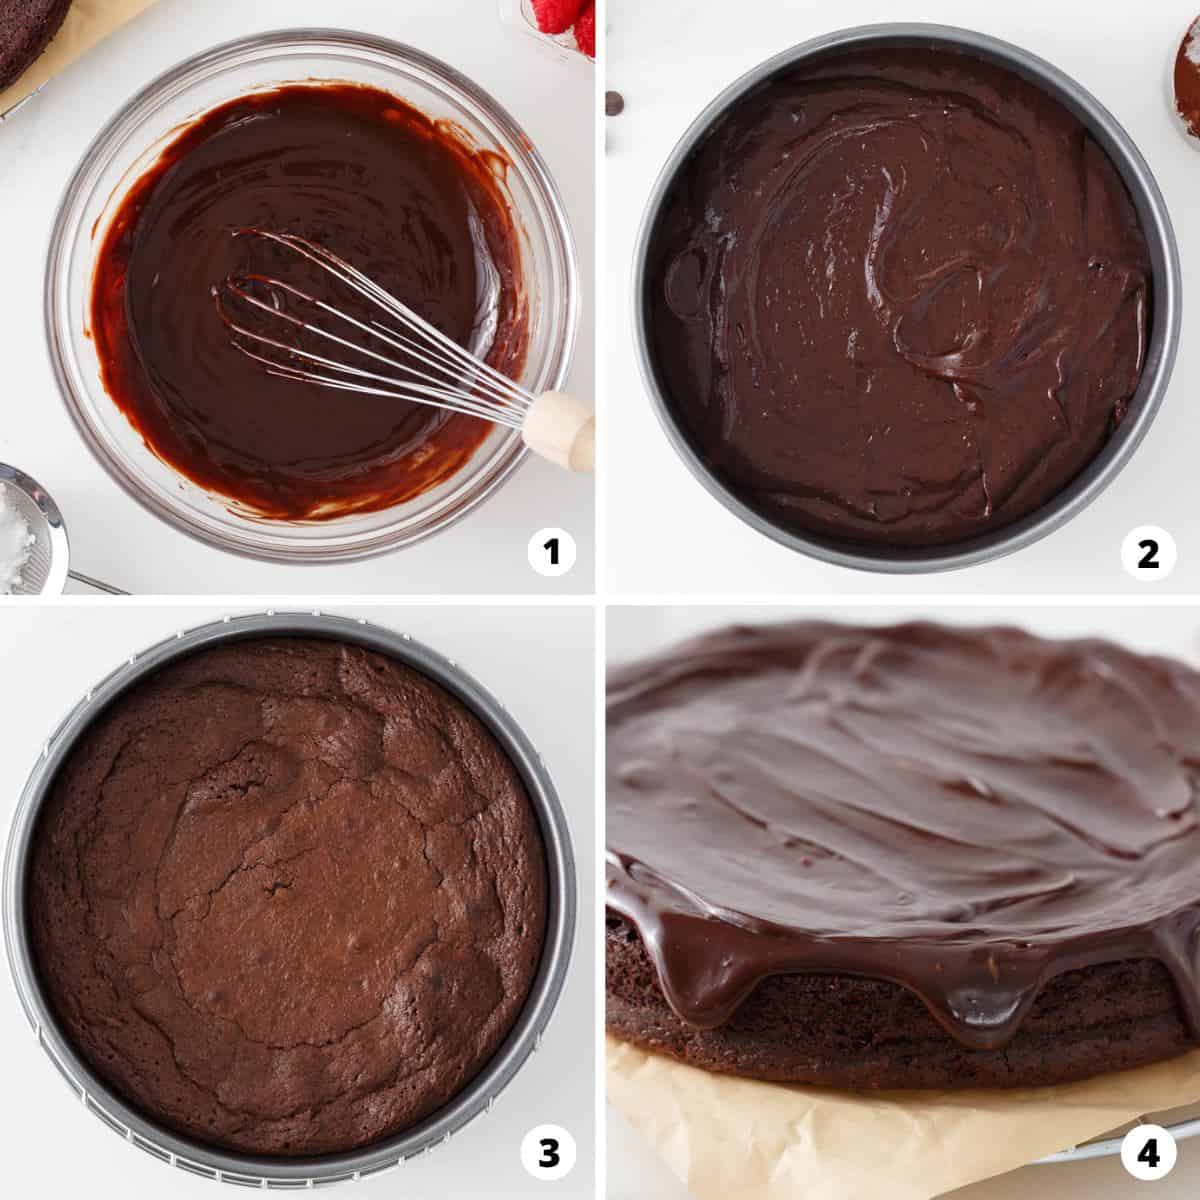 Showing how to make a flourless chocolate in a 4 step collage.